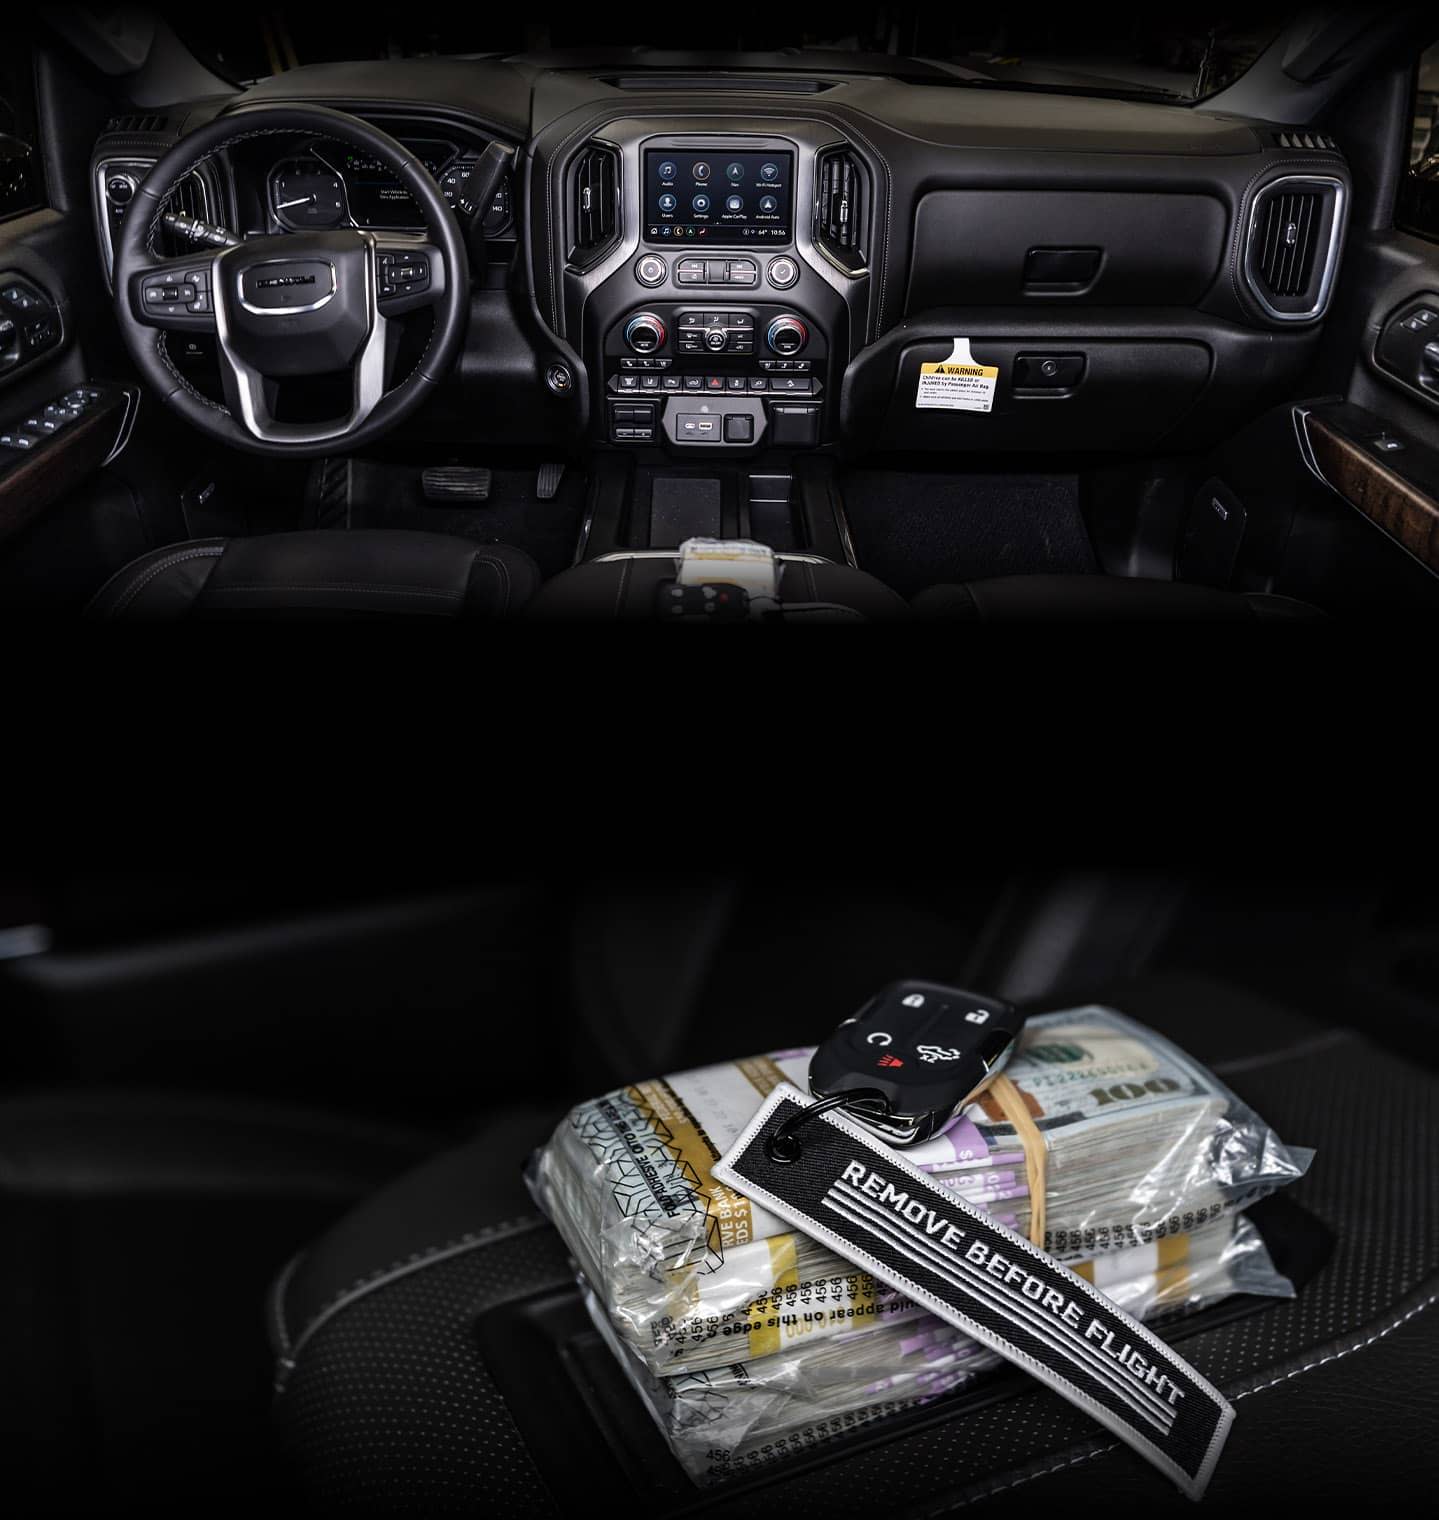 Driver's seat of LGND31 and an image of the $50,000 cash YOU can win!